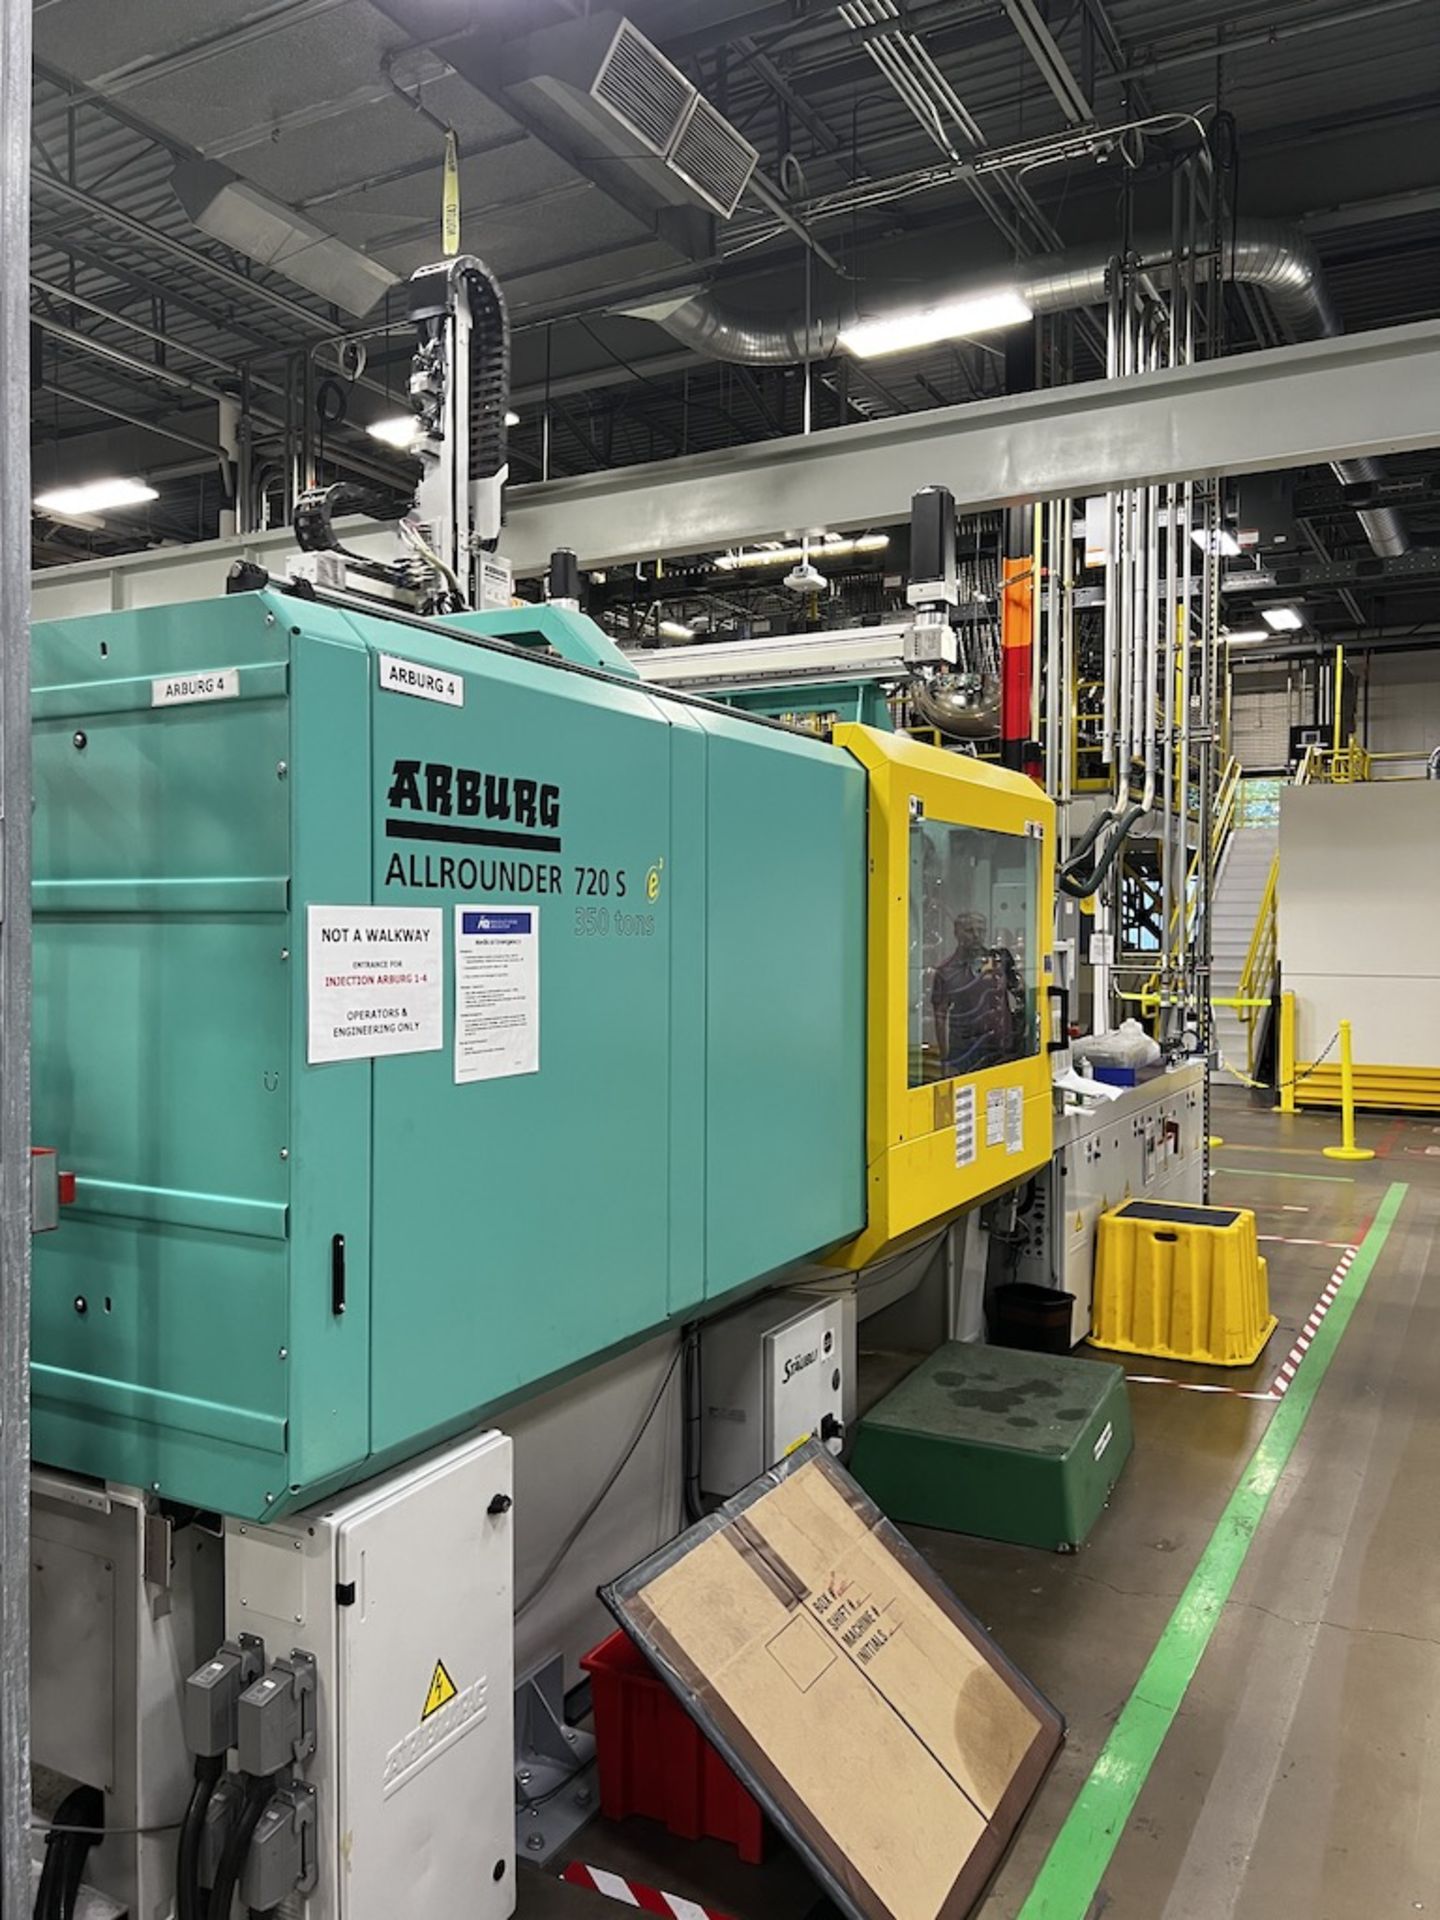 Arburg 320 Ton Injection Molding Press w/Integrated Arburg Robot, New in 2014